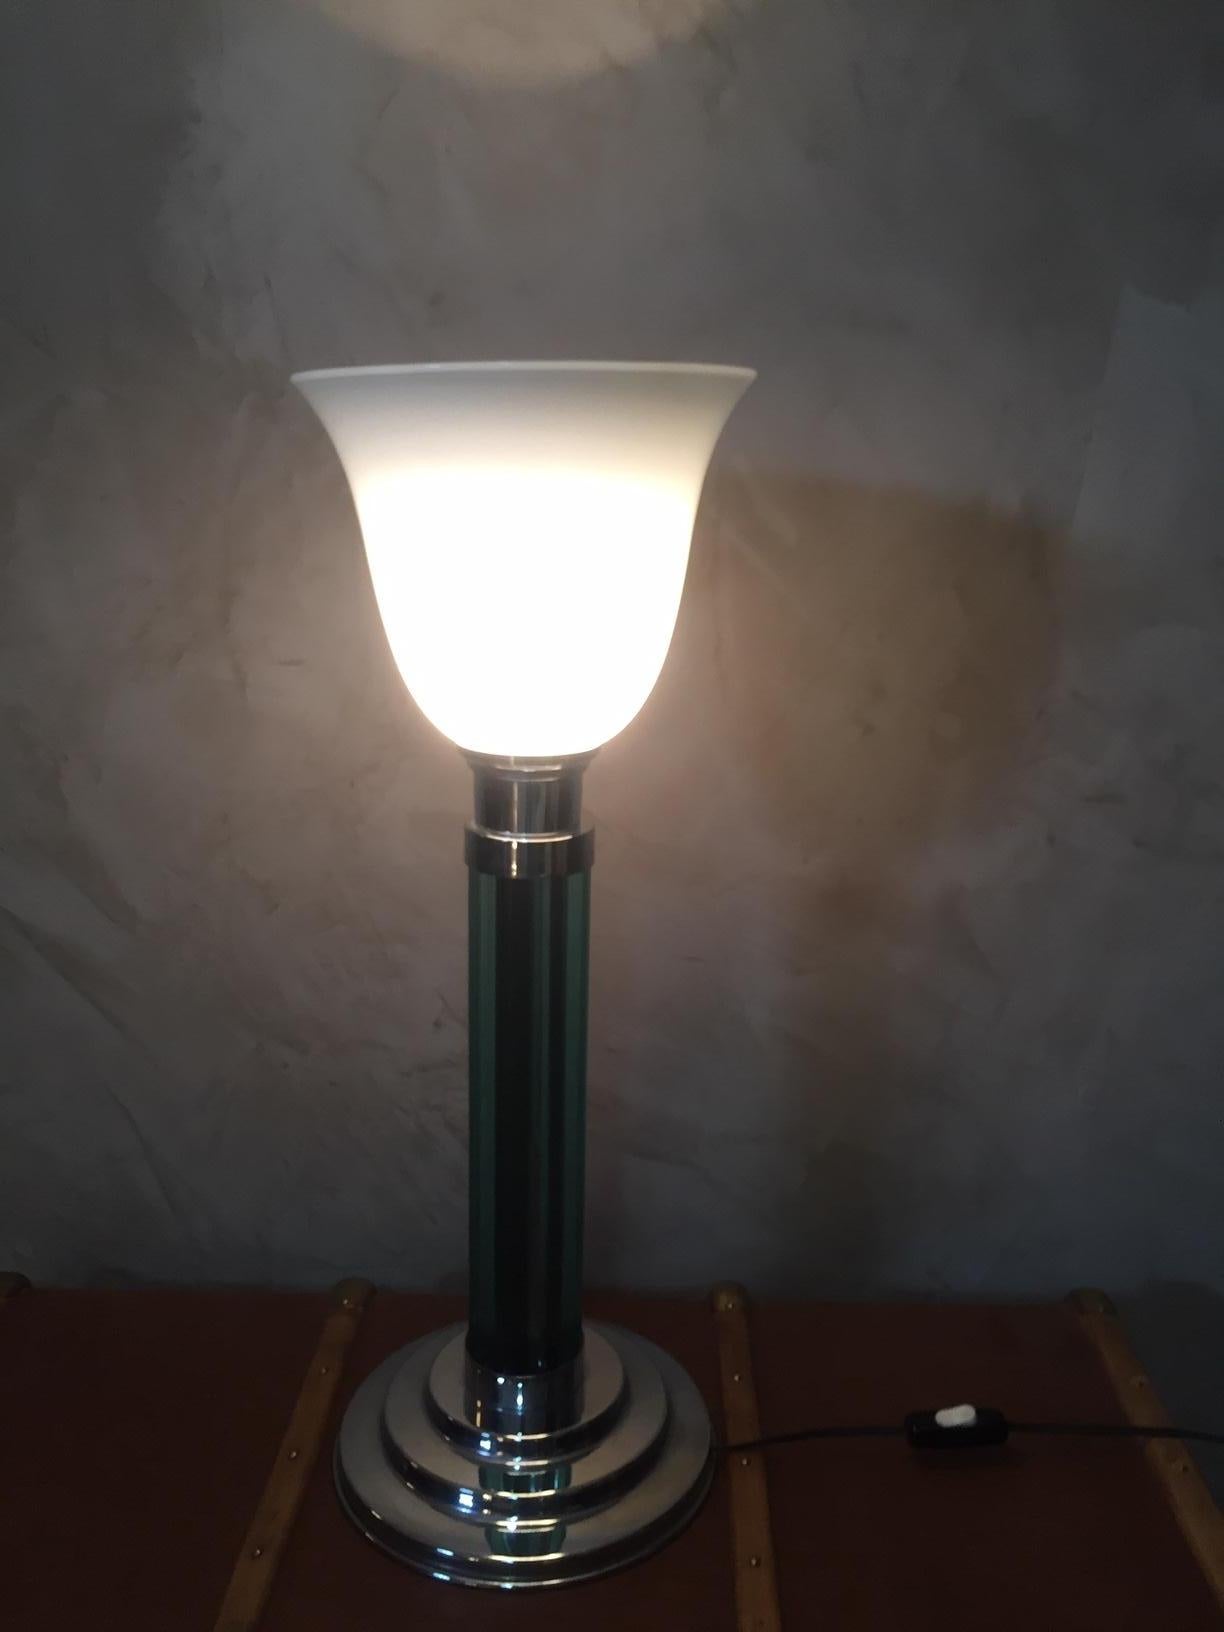 20th Century French Art Deco Table Lamp, 1930s (Mitte des 20. Jahrhunderts)